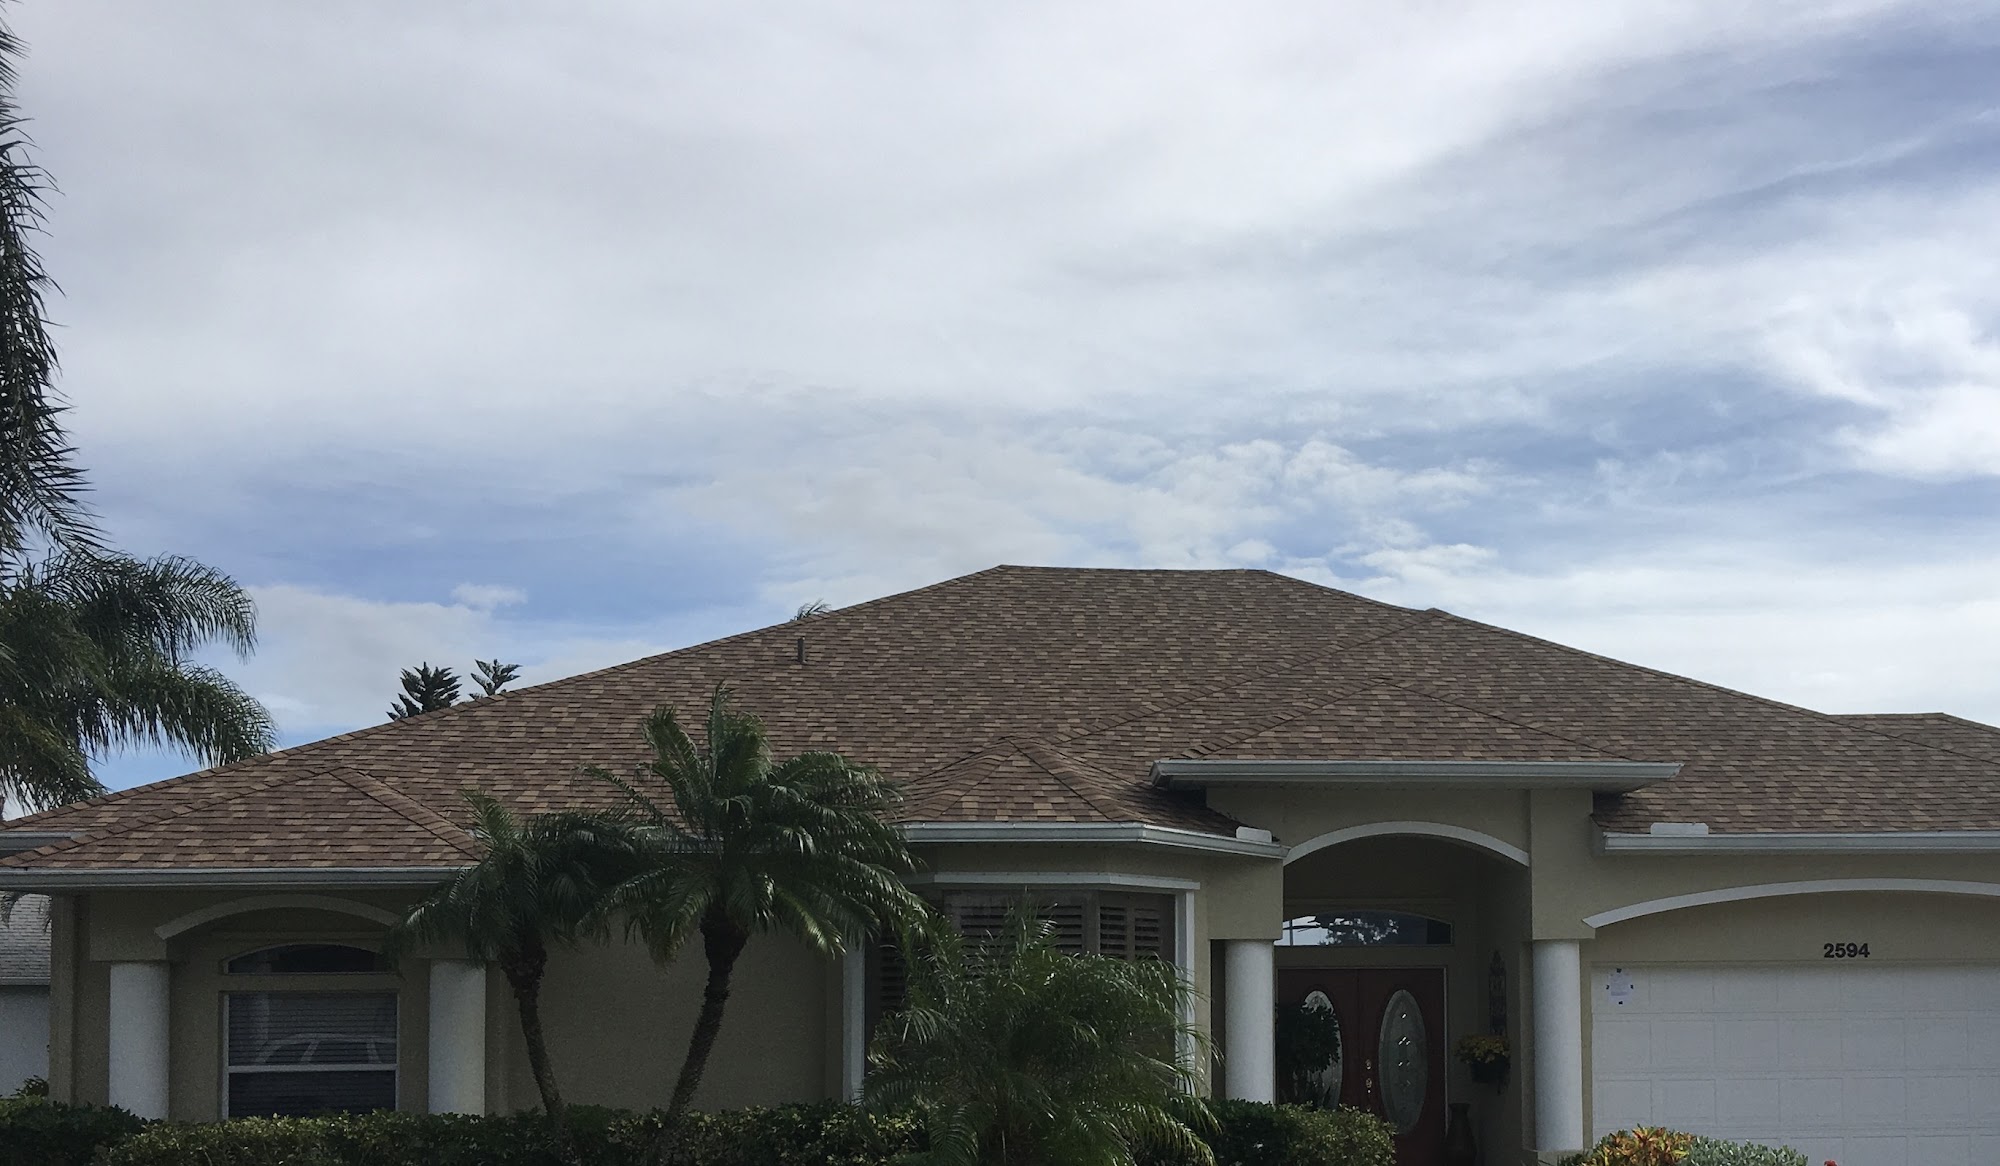 Florida Roofing and Renovations Inc